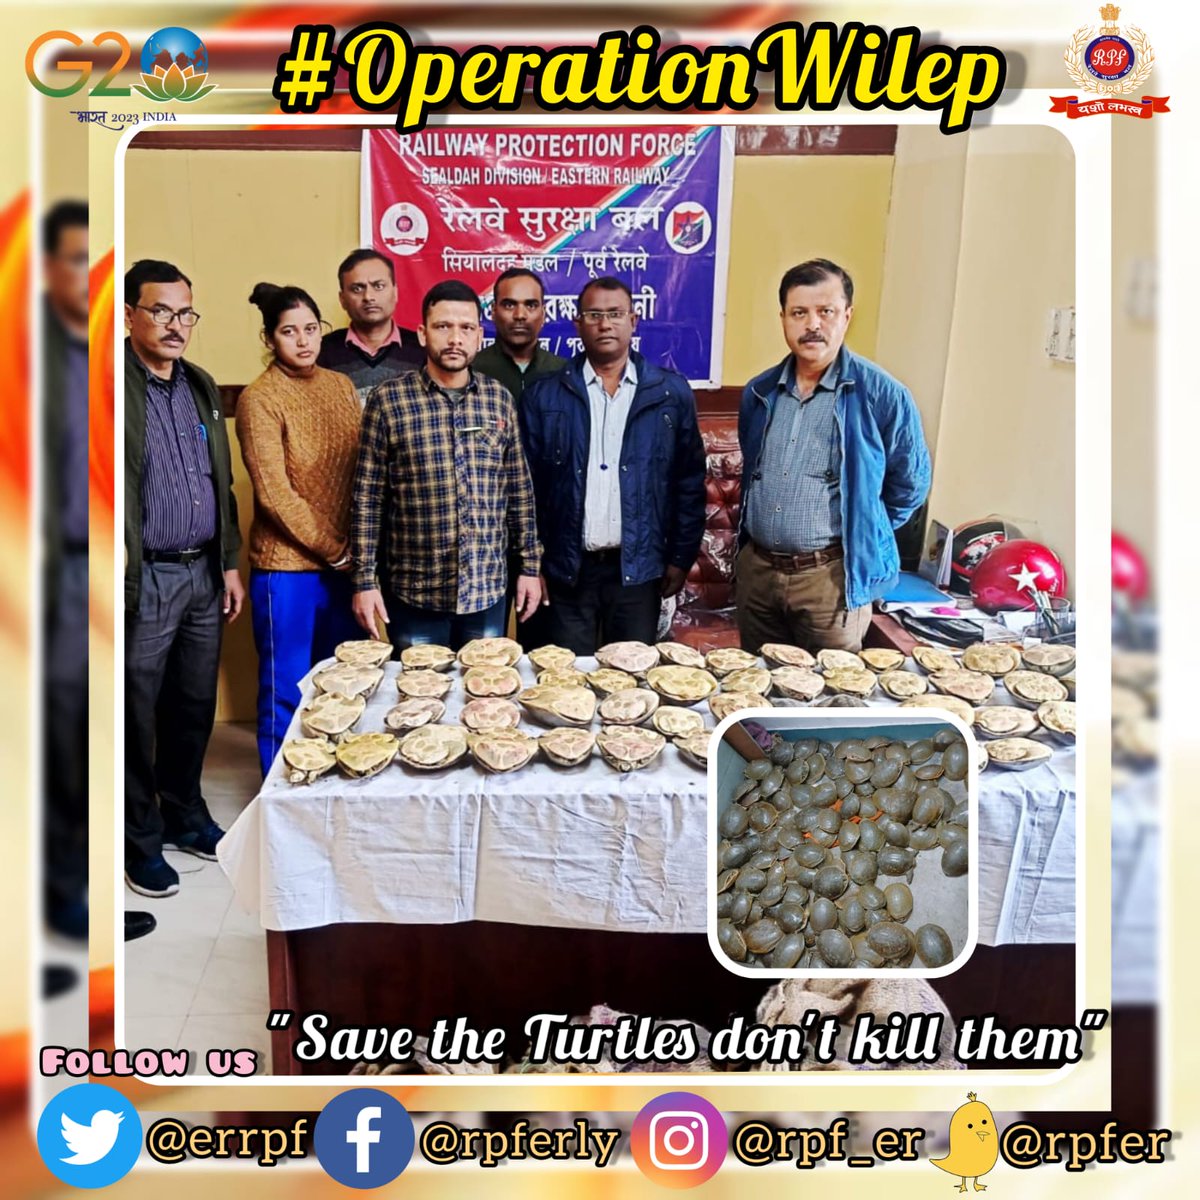 'Make the world a better place to live for every wild life species, don't kill them save the turtles' 126 Turtles rescued from a train at Sealdah Railway Station....
#OperationWilep 
#Saveturtles 
#wildlifetrafficking